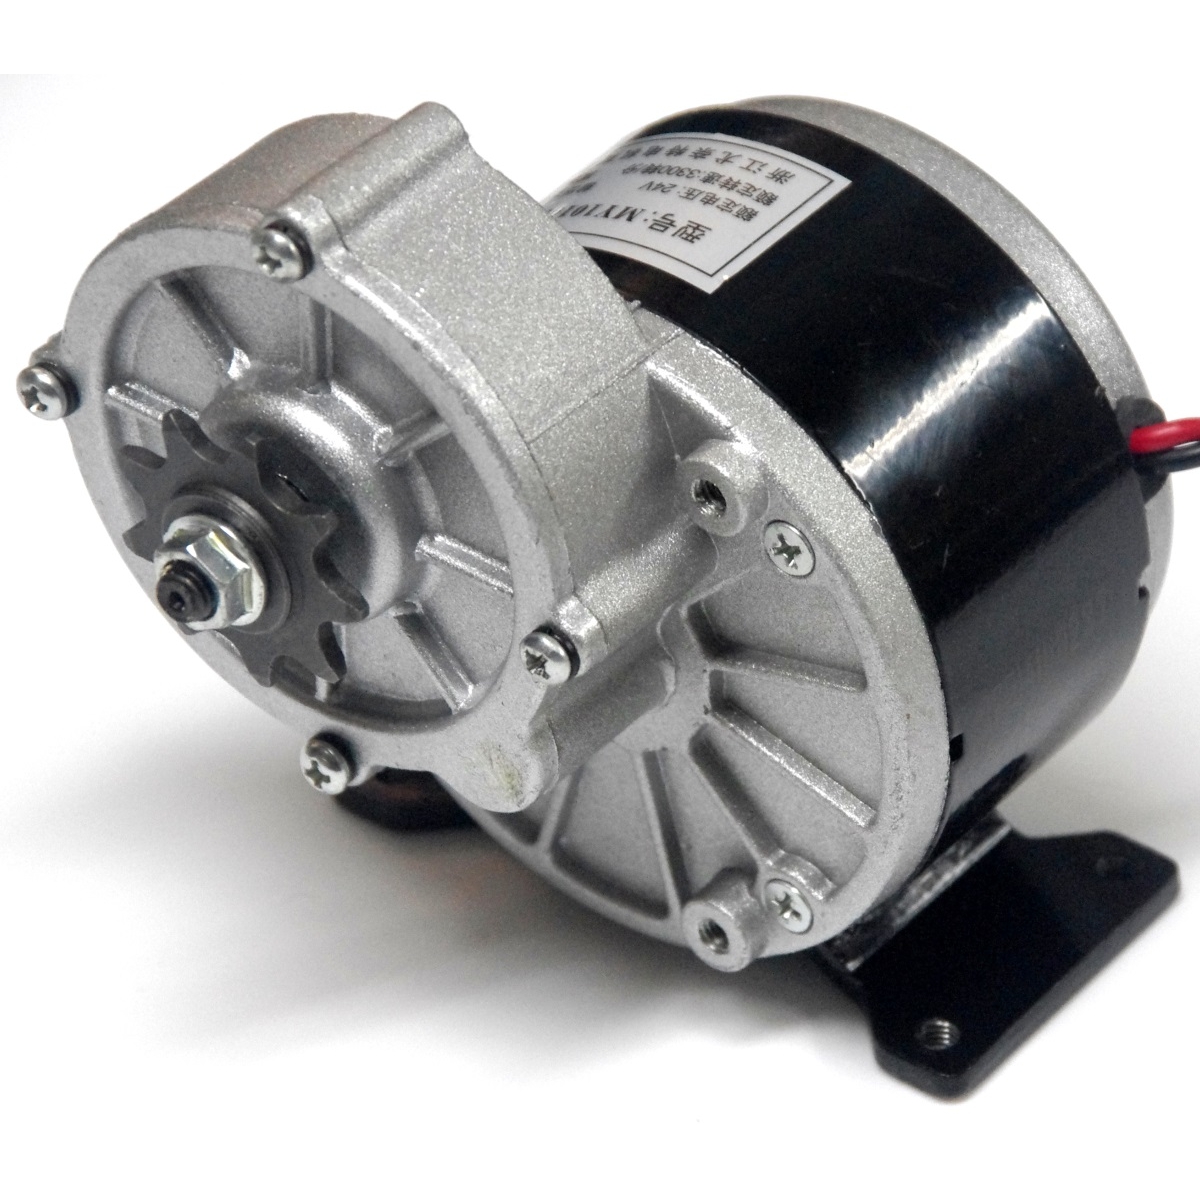 Buy MY1016Z2 360RPM 250W Geared DC Motor for Ebike Online at Best Price